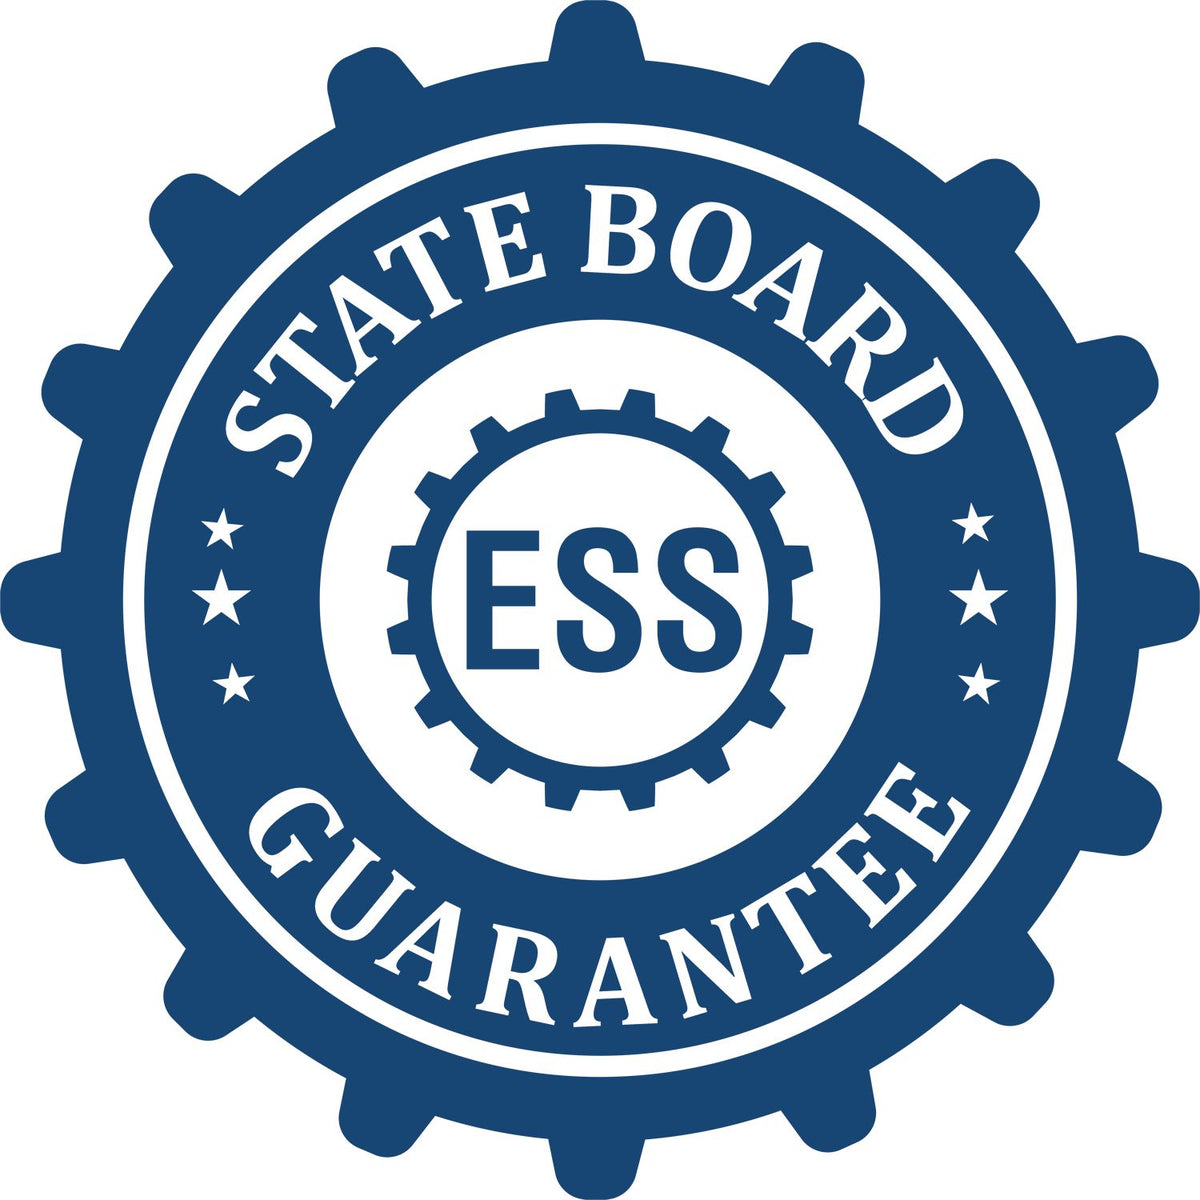 An emblem in a gear shape illustrating a state board guarantee for the Digital Ohio PE Stamp and Electronic Seal for Ohio Engineer product.